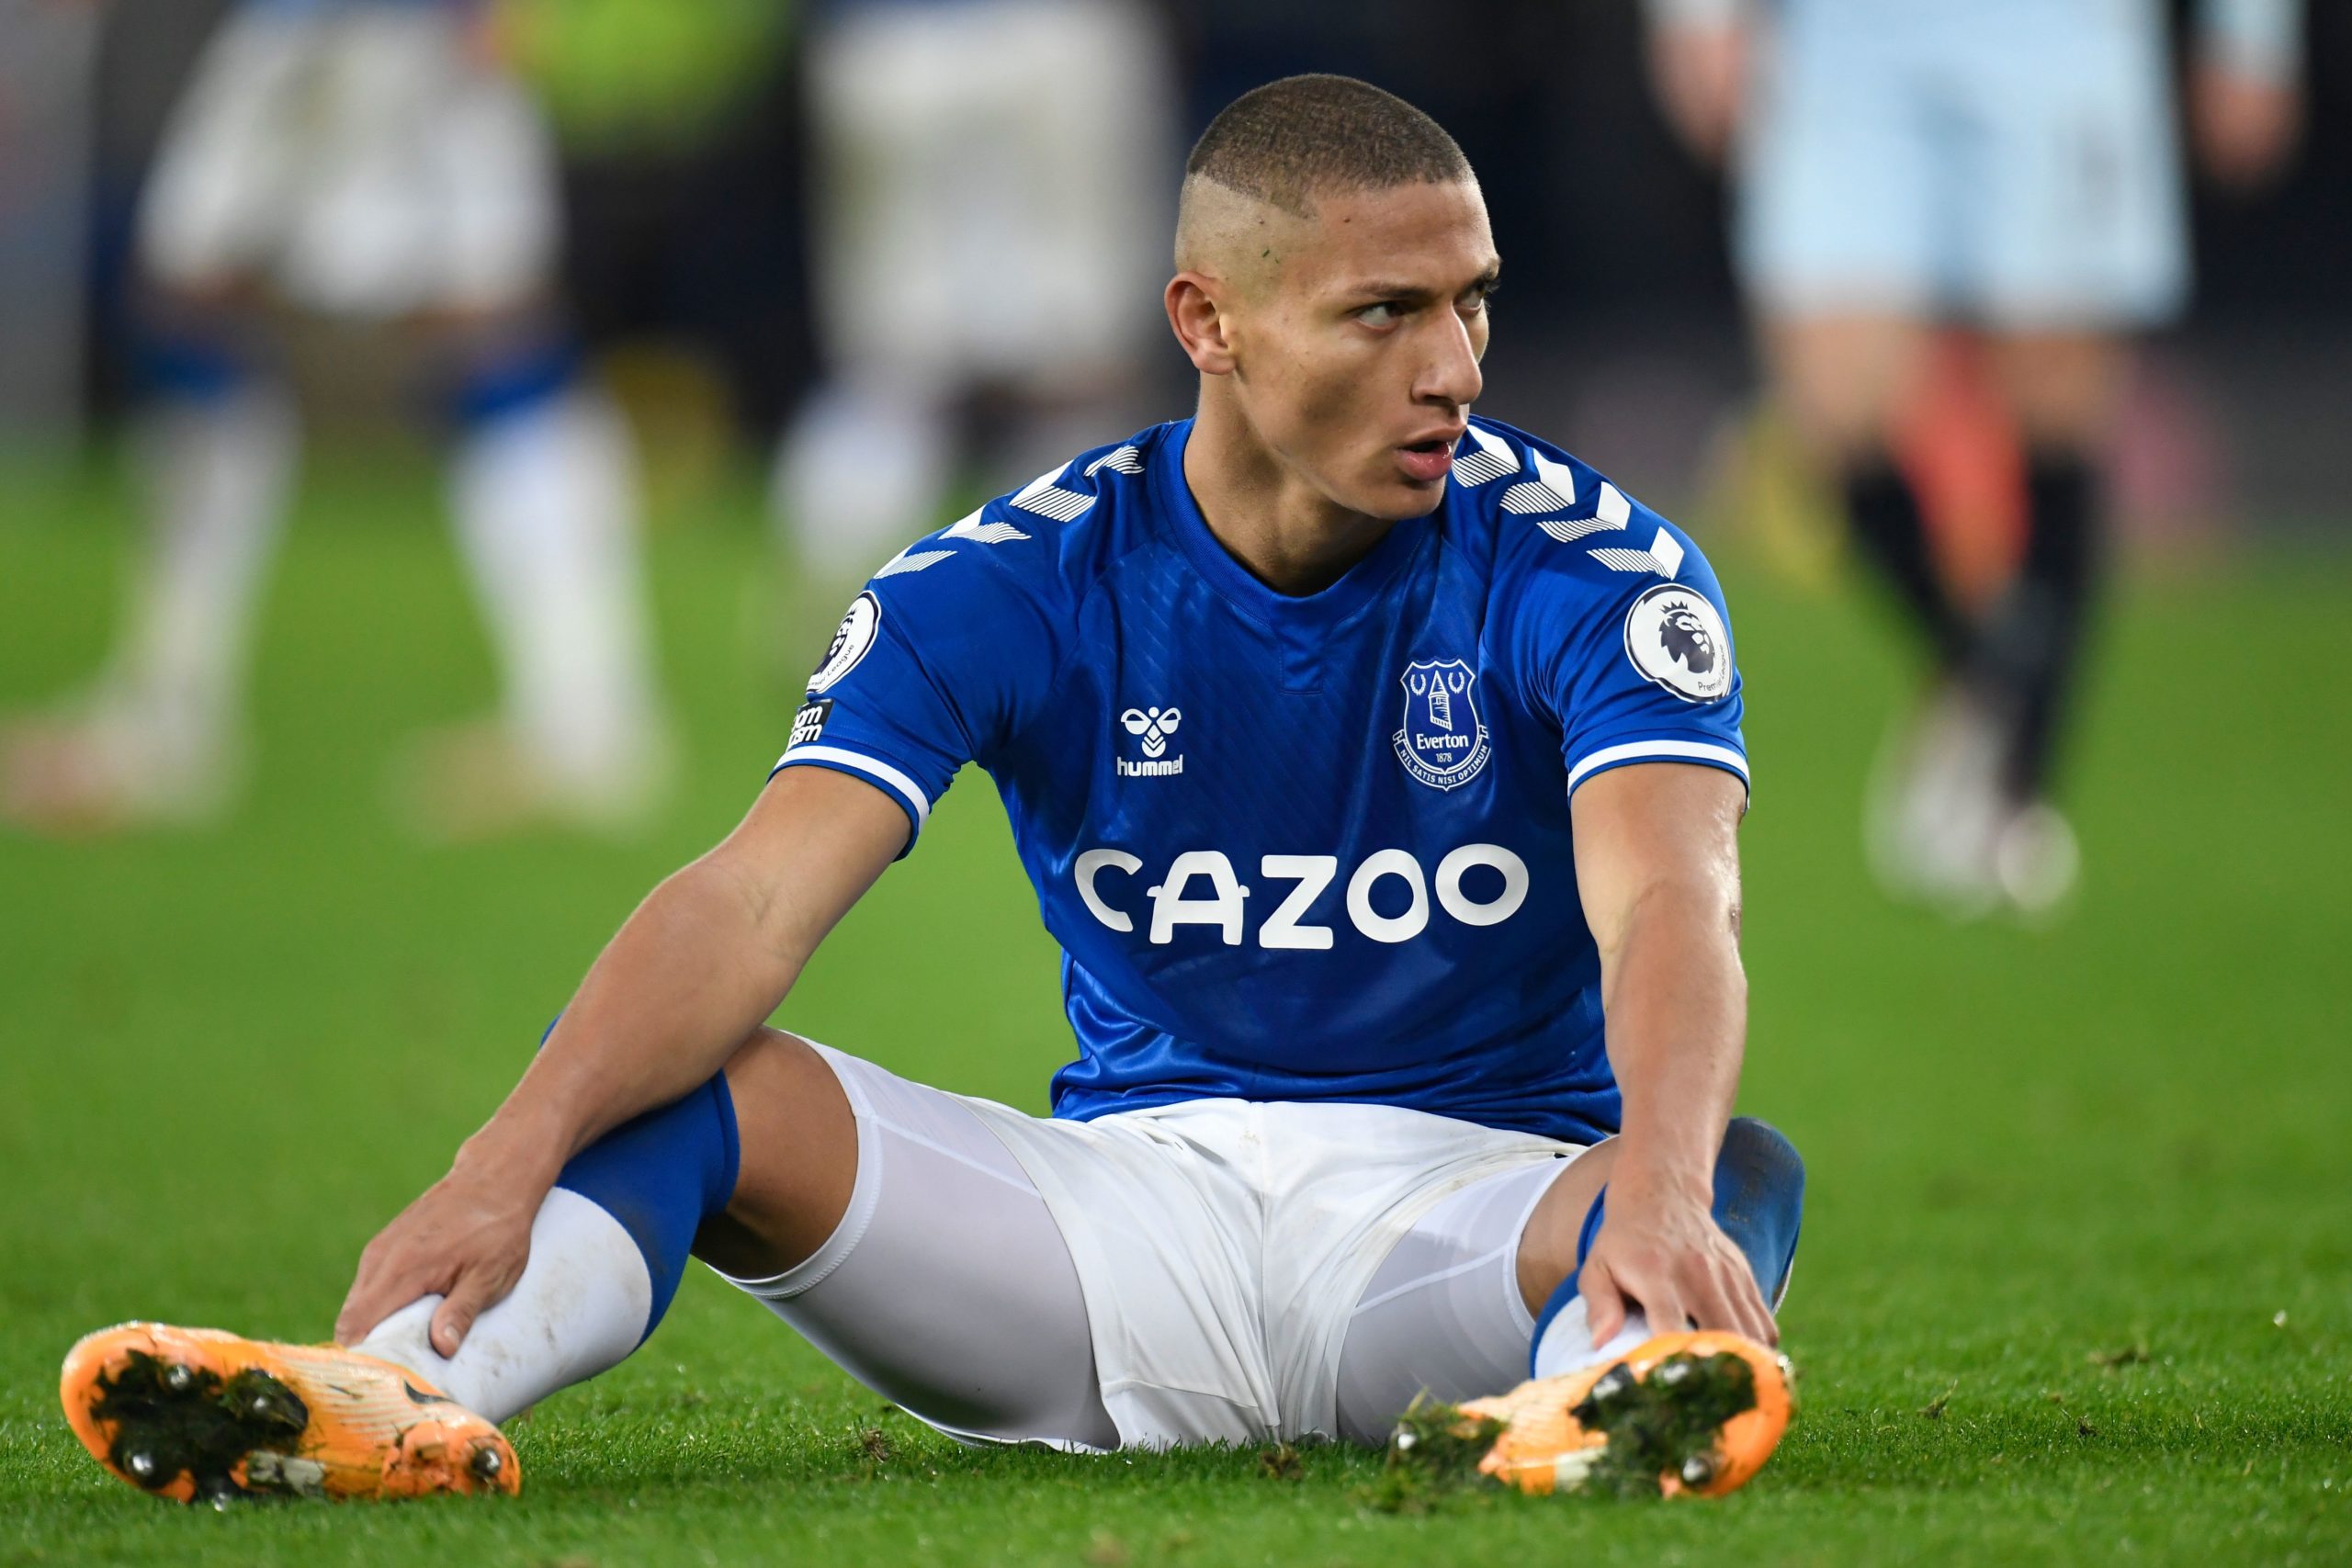 Everton's Richarlison gathering interest from Paris (Richarlison is seen in the picture)